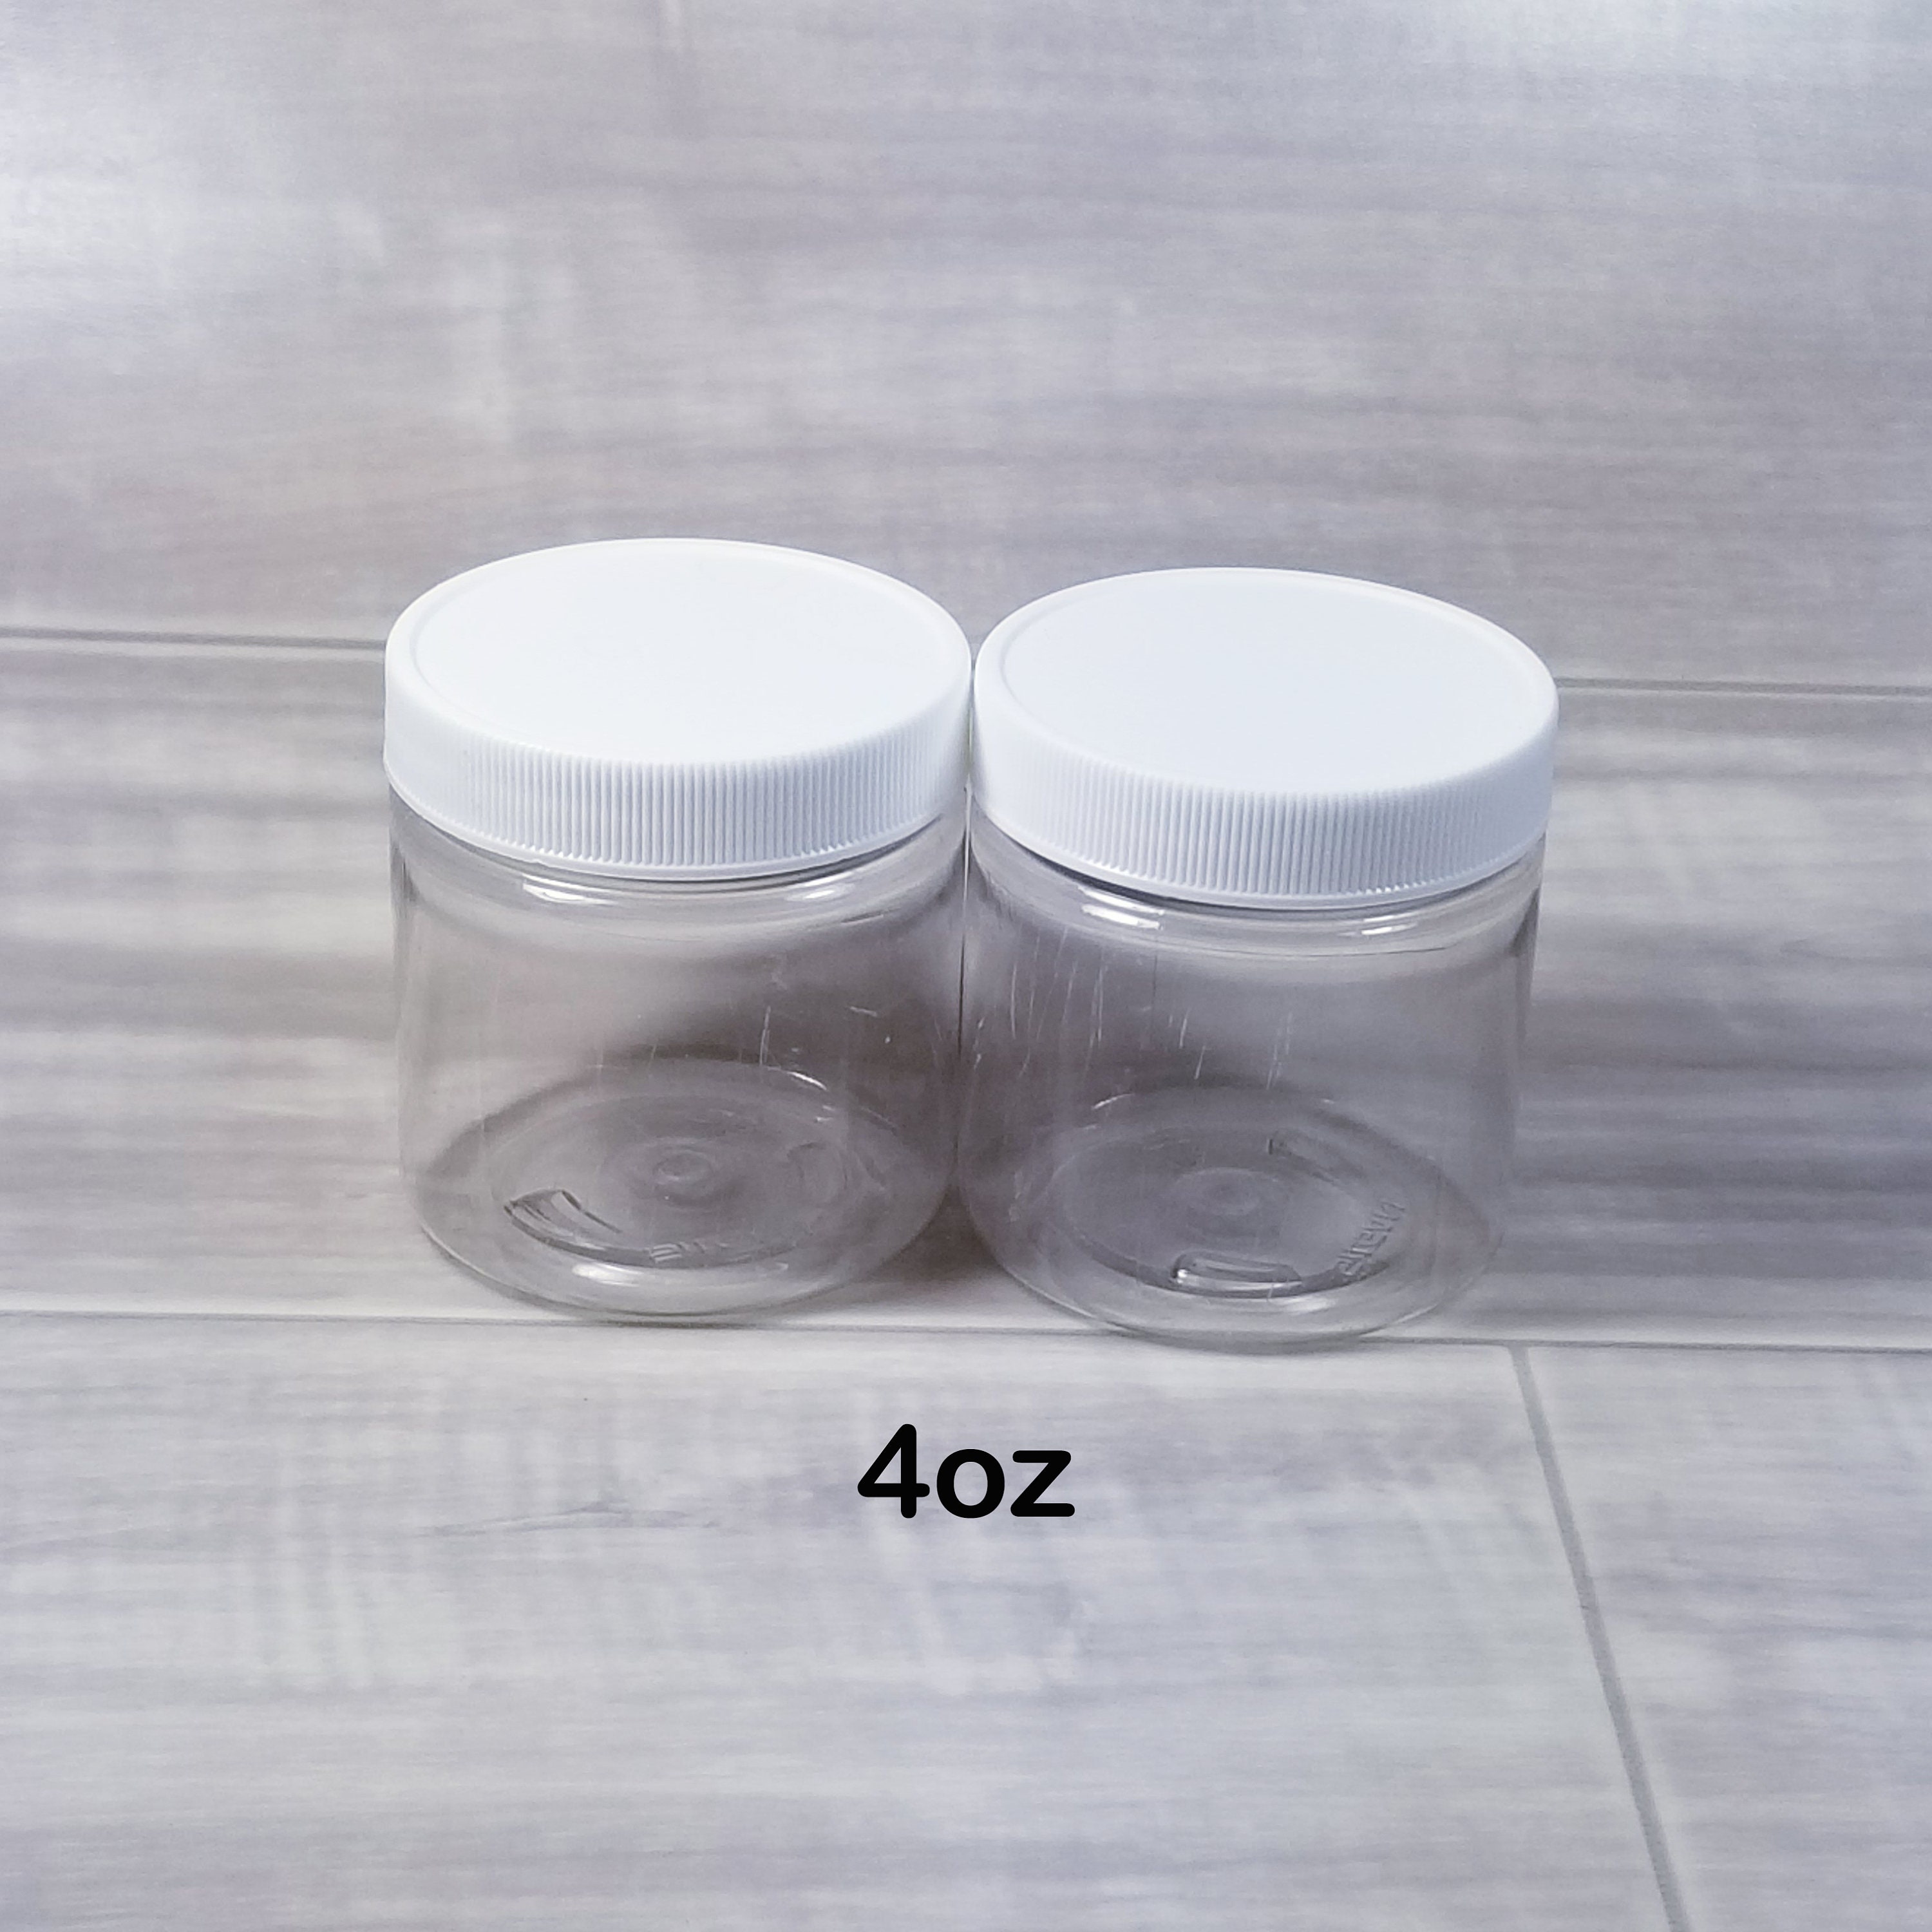 50 PCS 10 oz Slime Containers with Lids and Handles, Plastic 300ml Storage  Bucket Containers, Clear Slime Storage Case for Slime DIY Art Craft